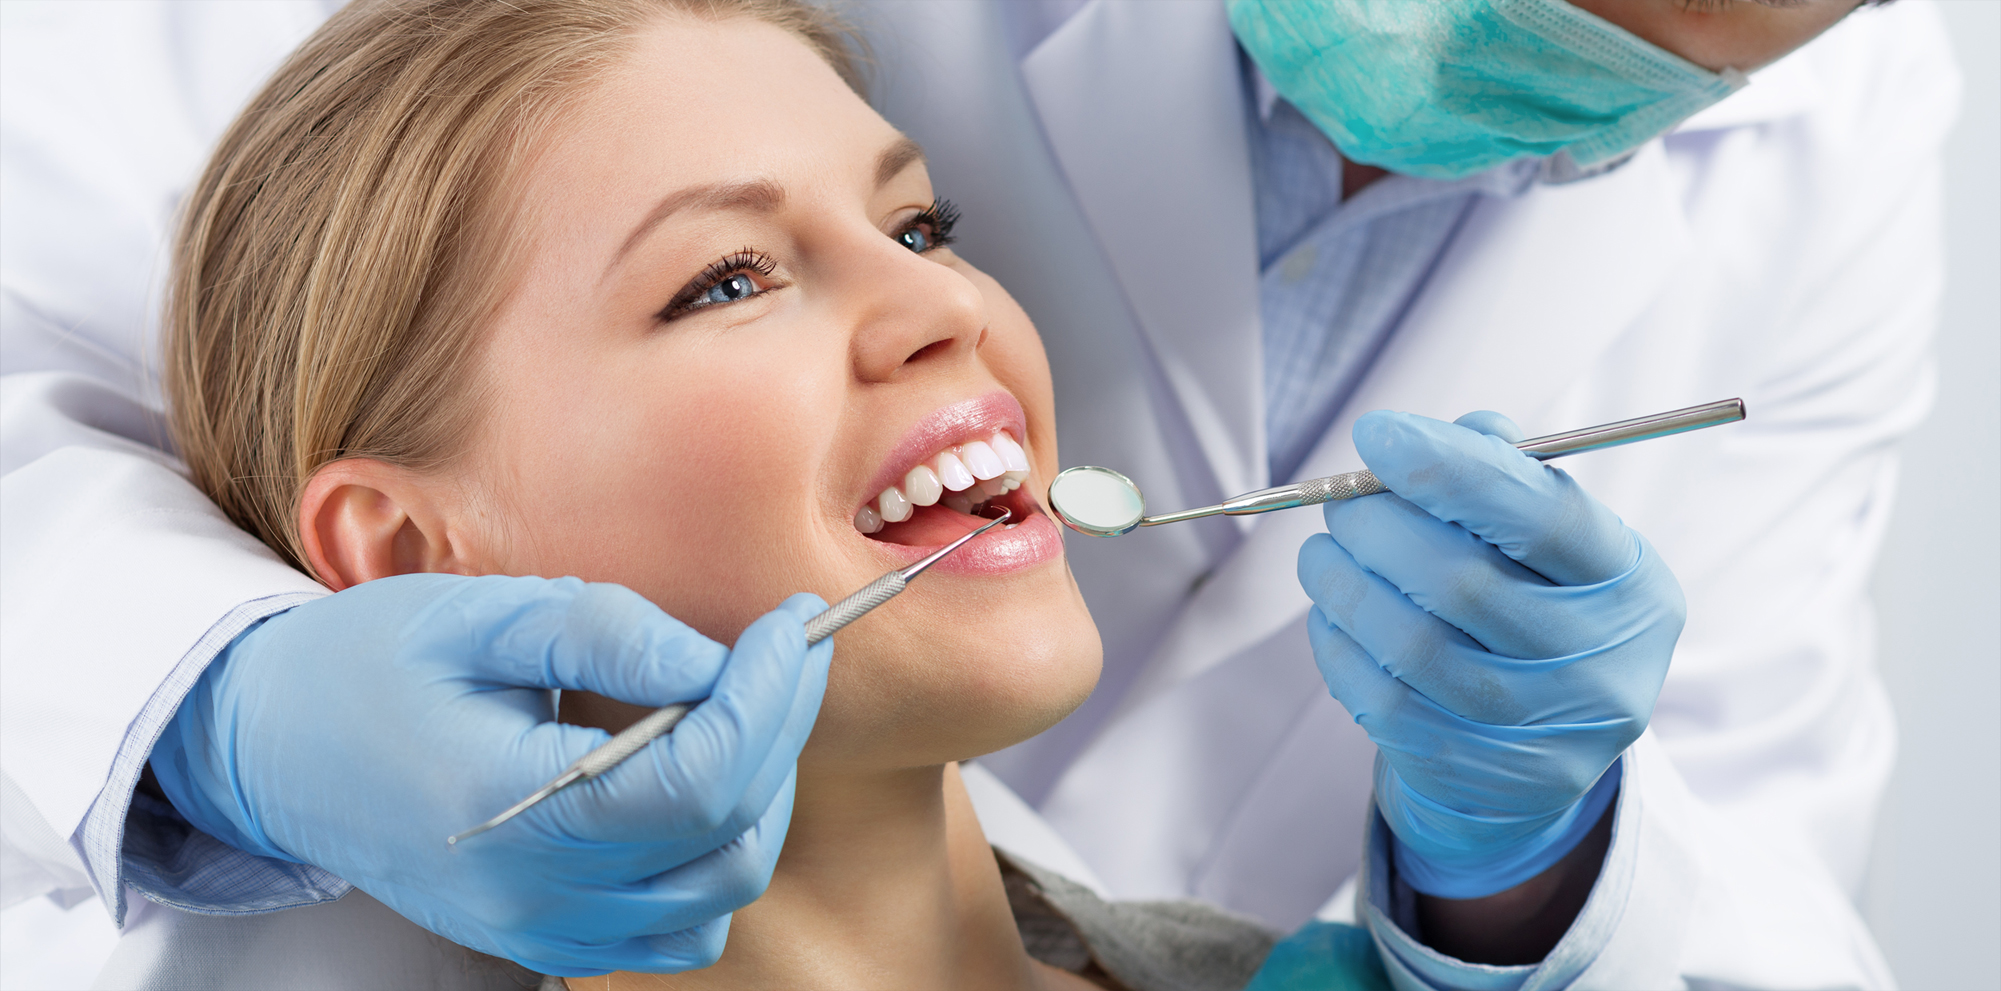 We are the best preventive dentistry in Canberra.